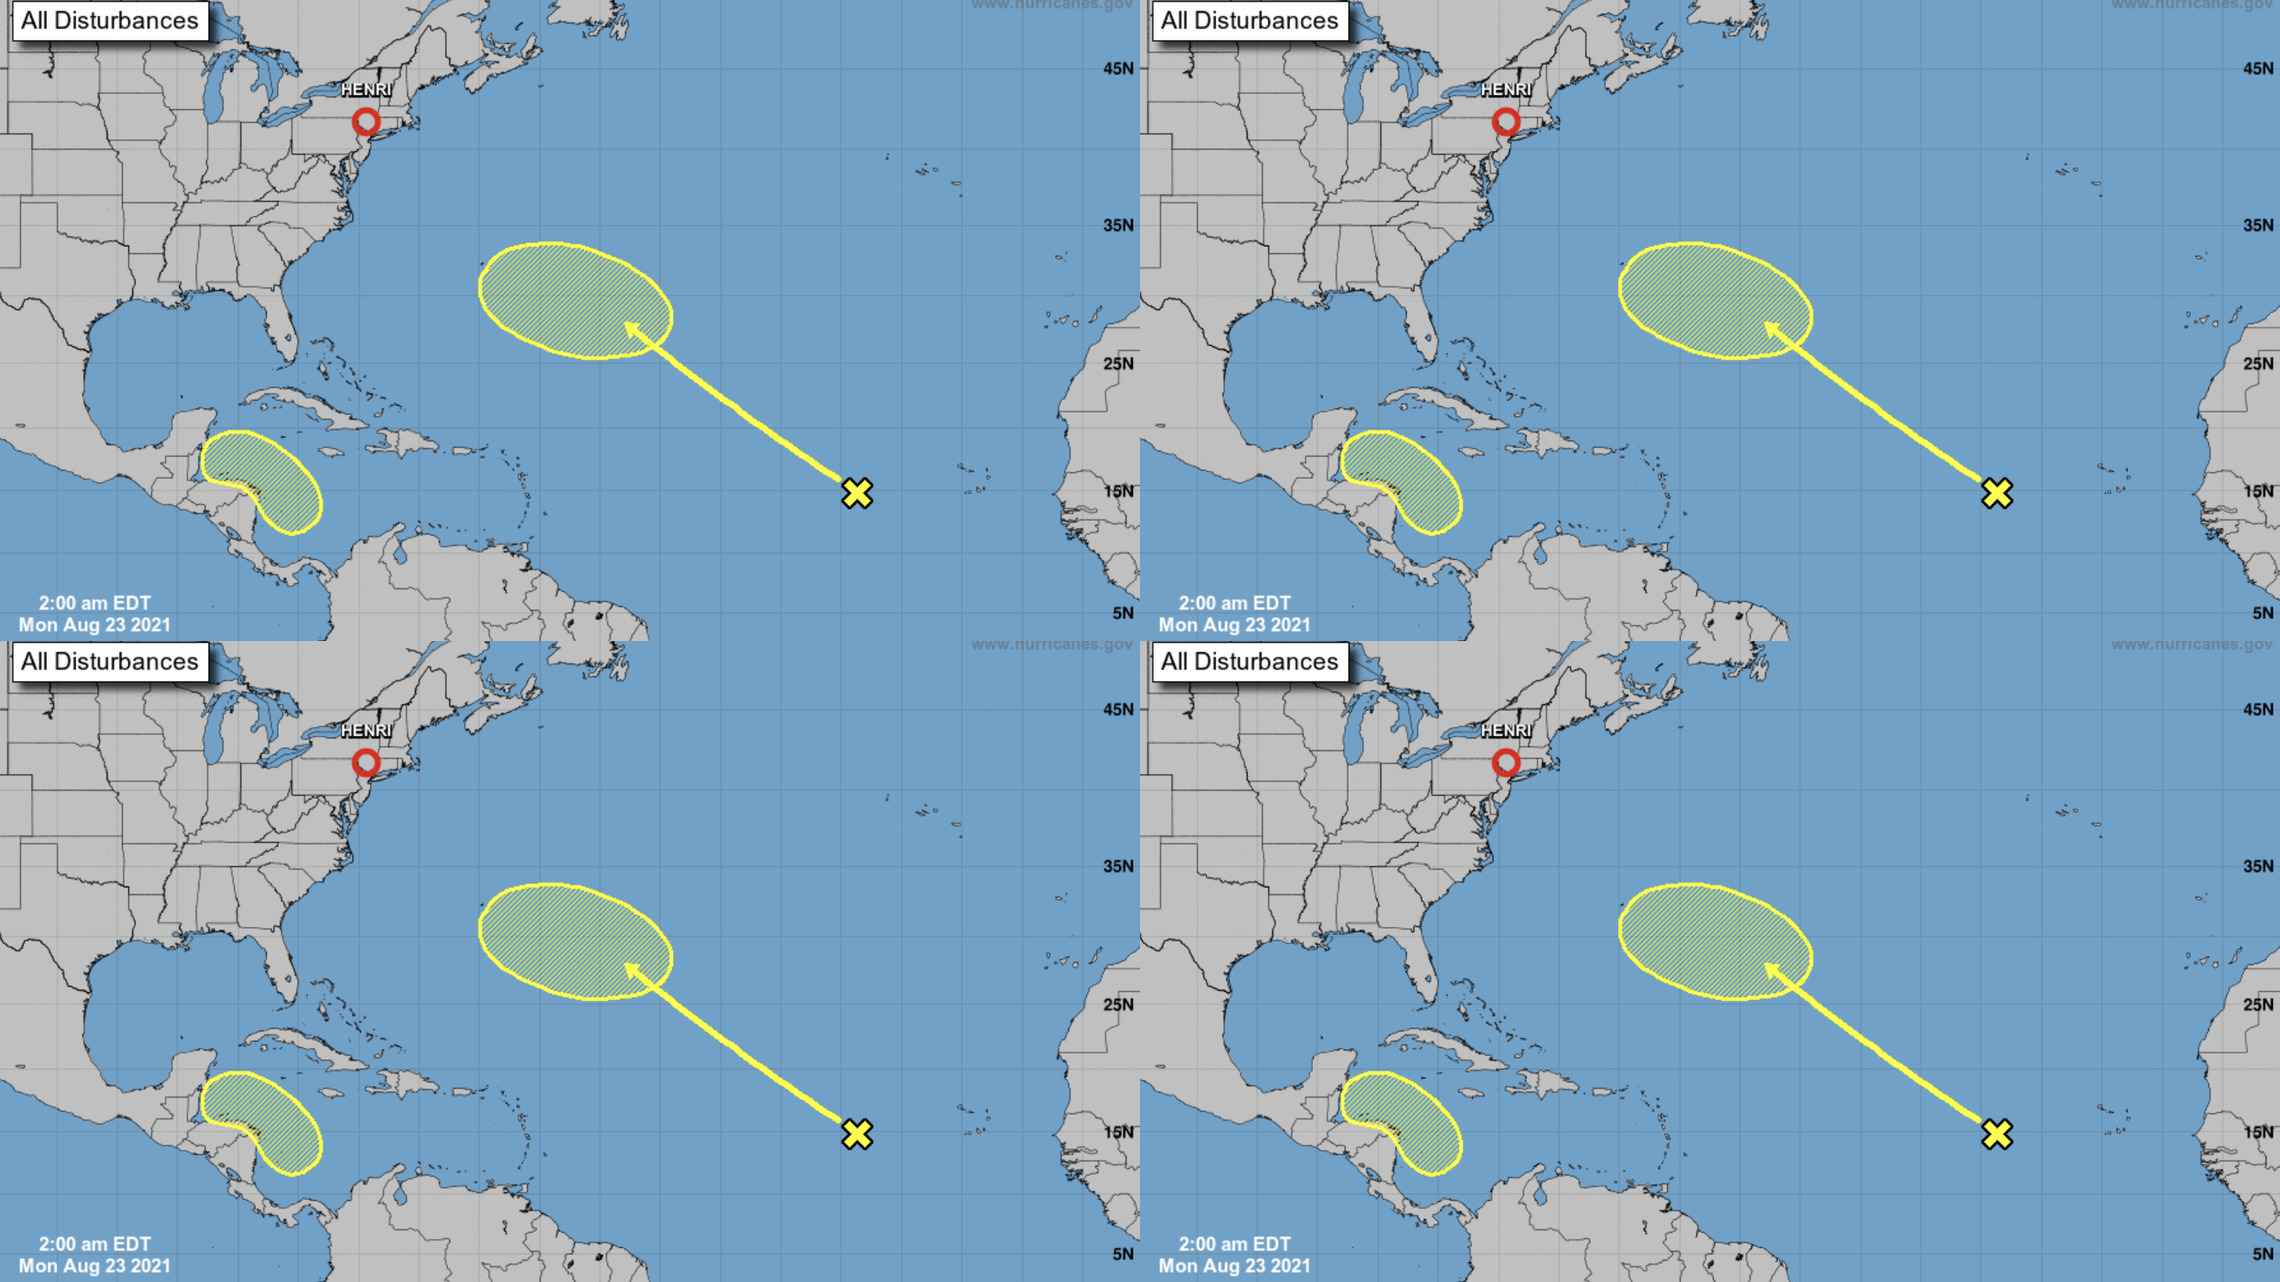 There's A Disturbance In The Atlantic; And One Could Form In The Caribbean: NHC